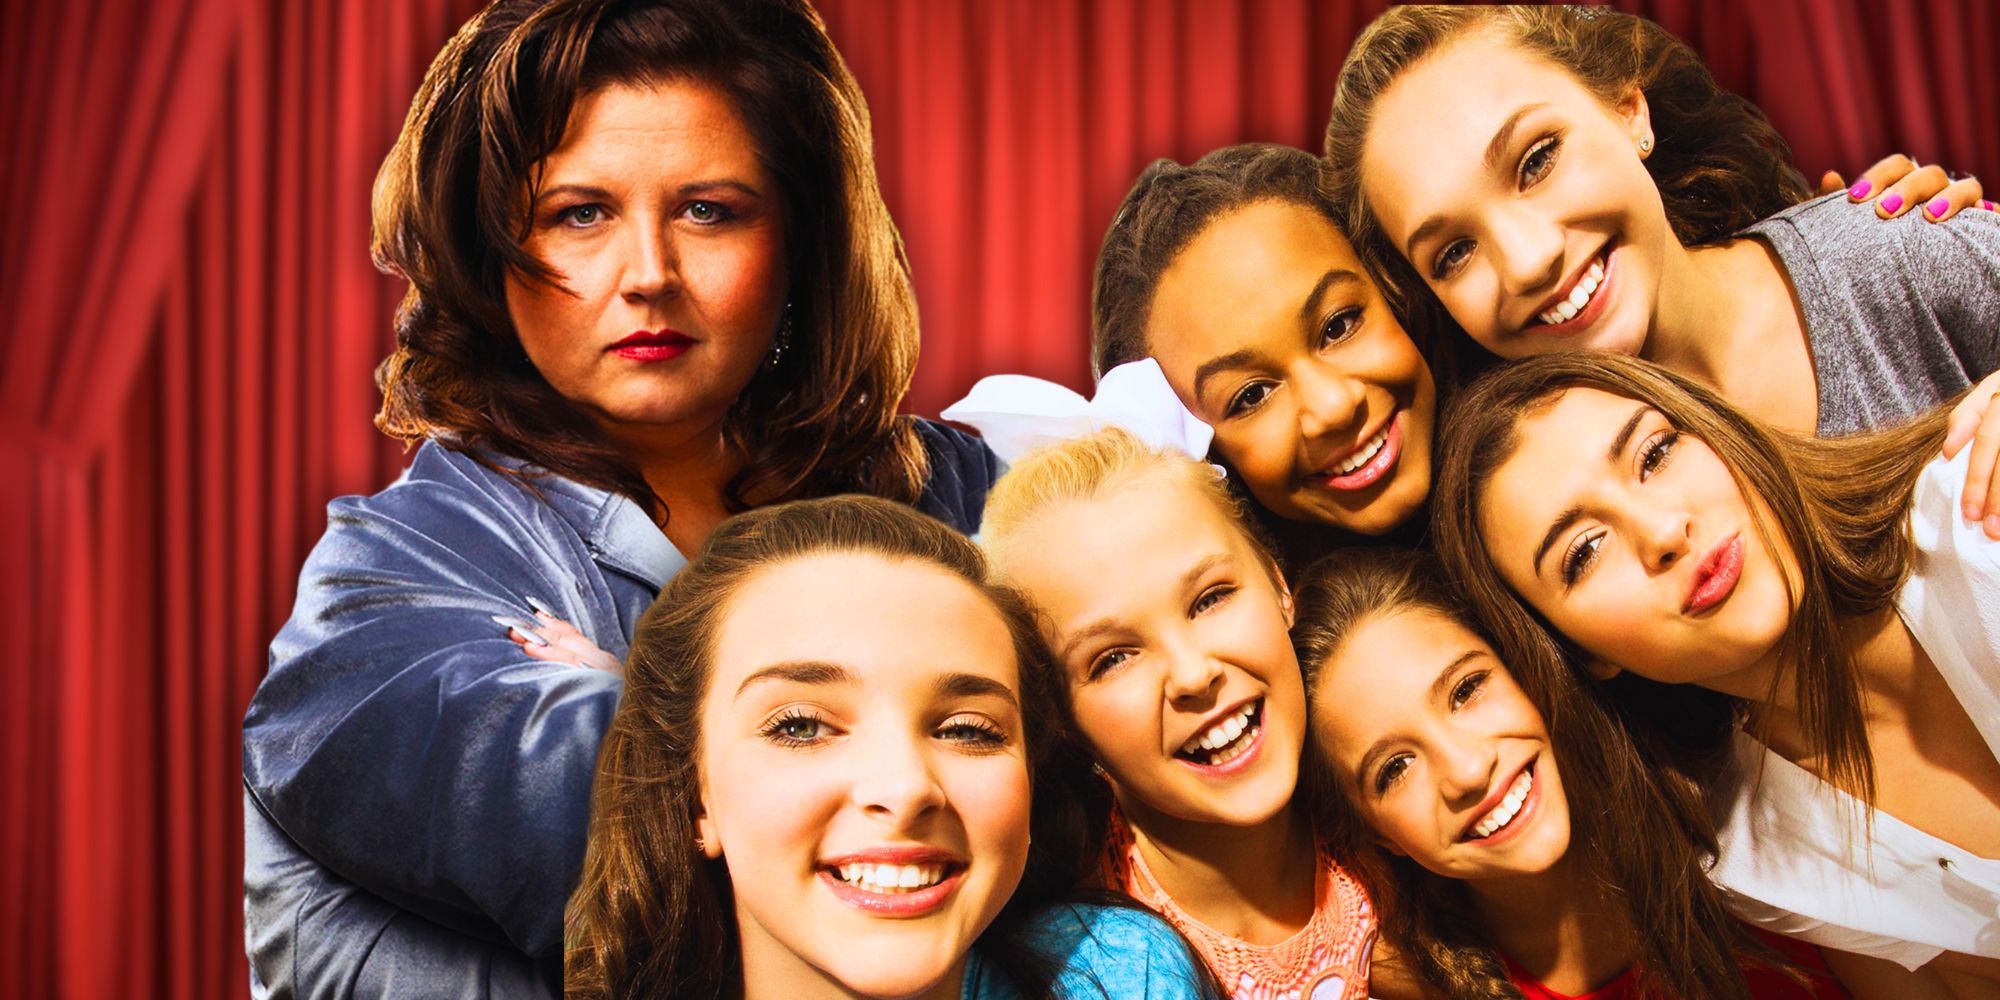 dance moms montage moms kids and red curtain-1